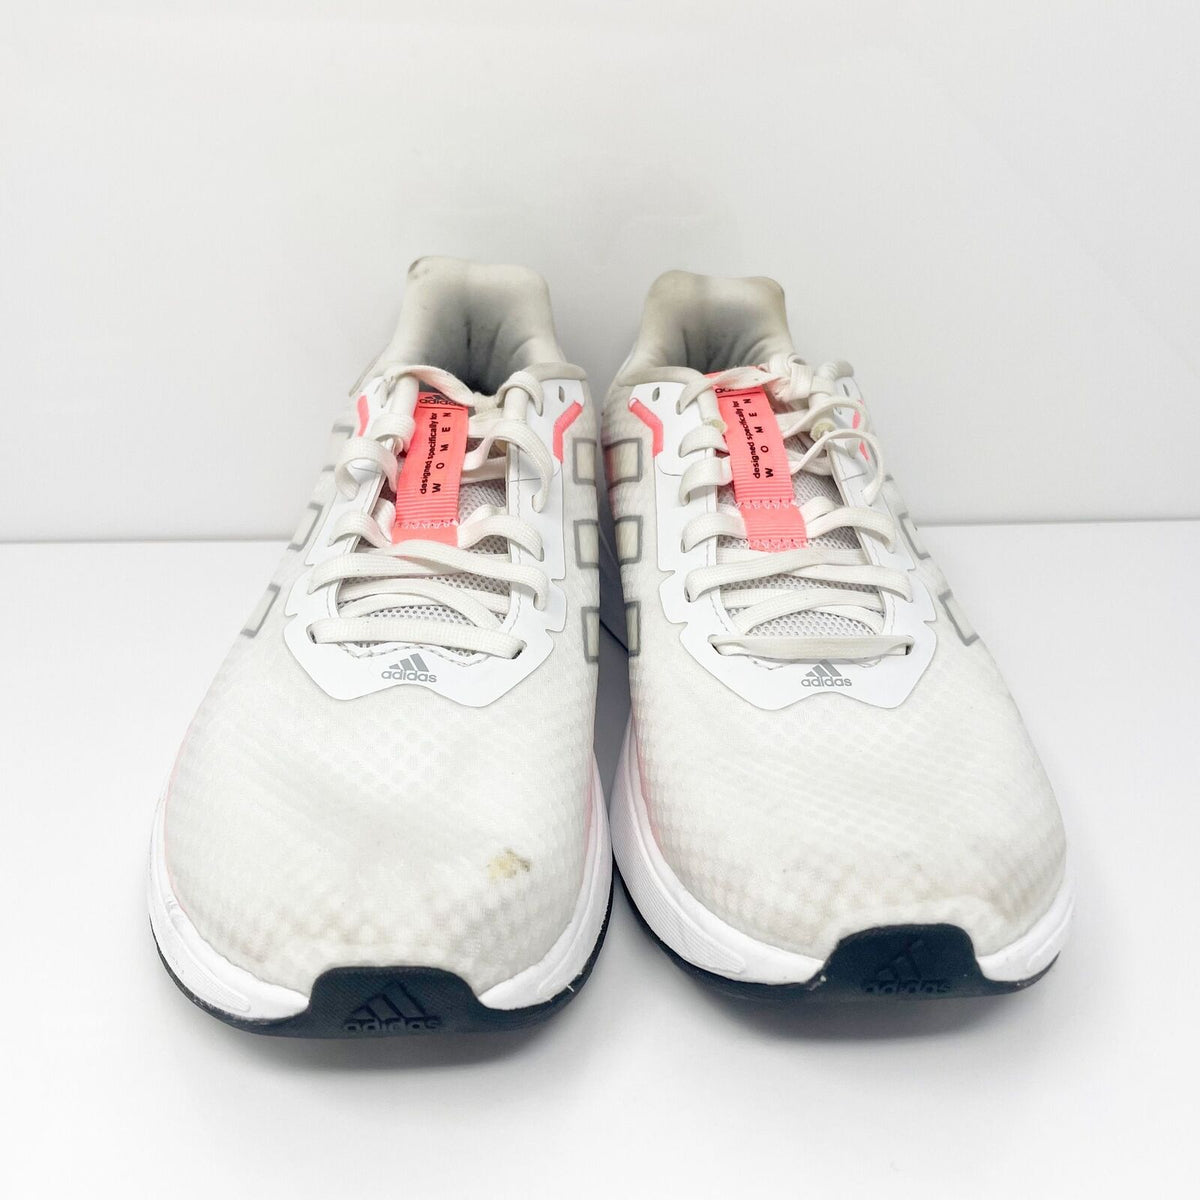 Adidas Womens Speedmotion GX0570 White Running Shoes Sneakers Size 8 ...